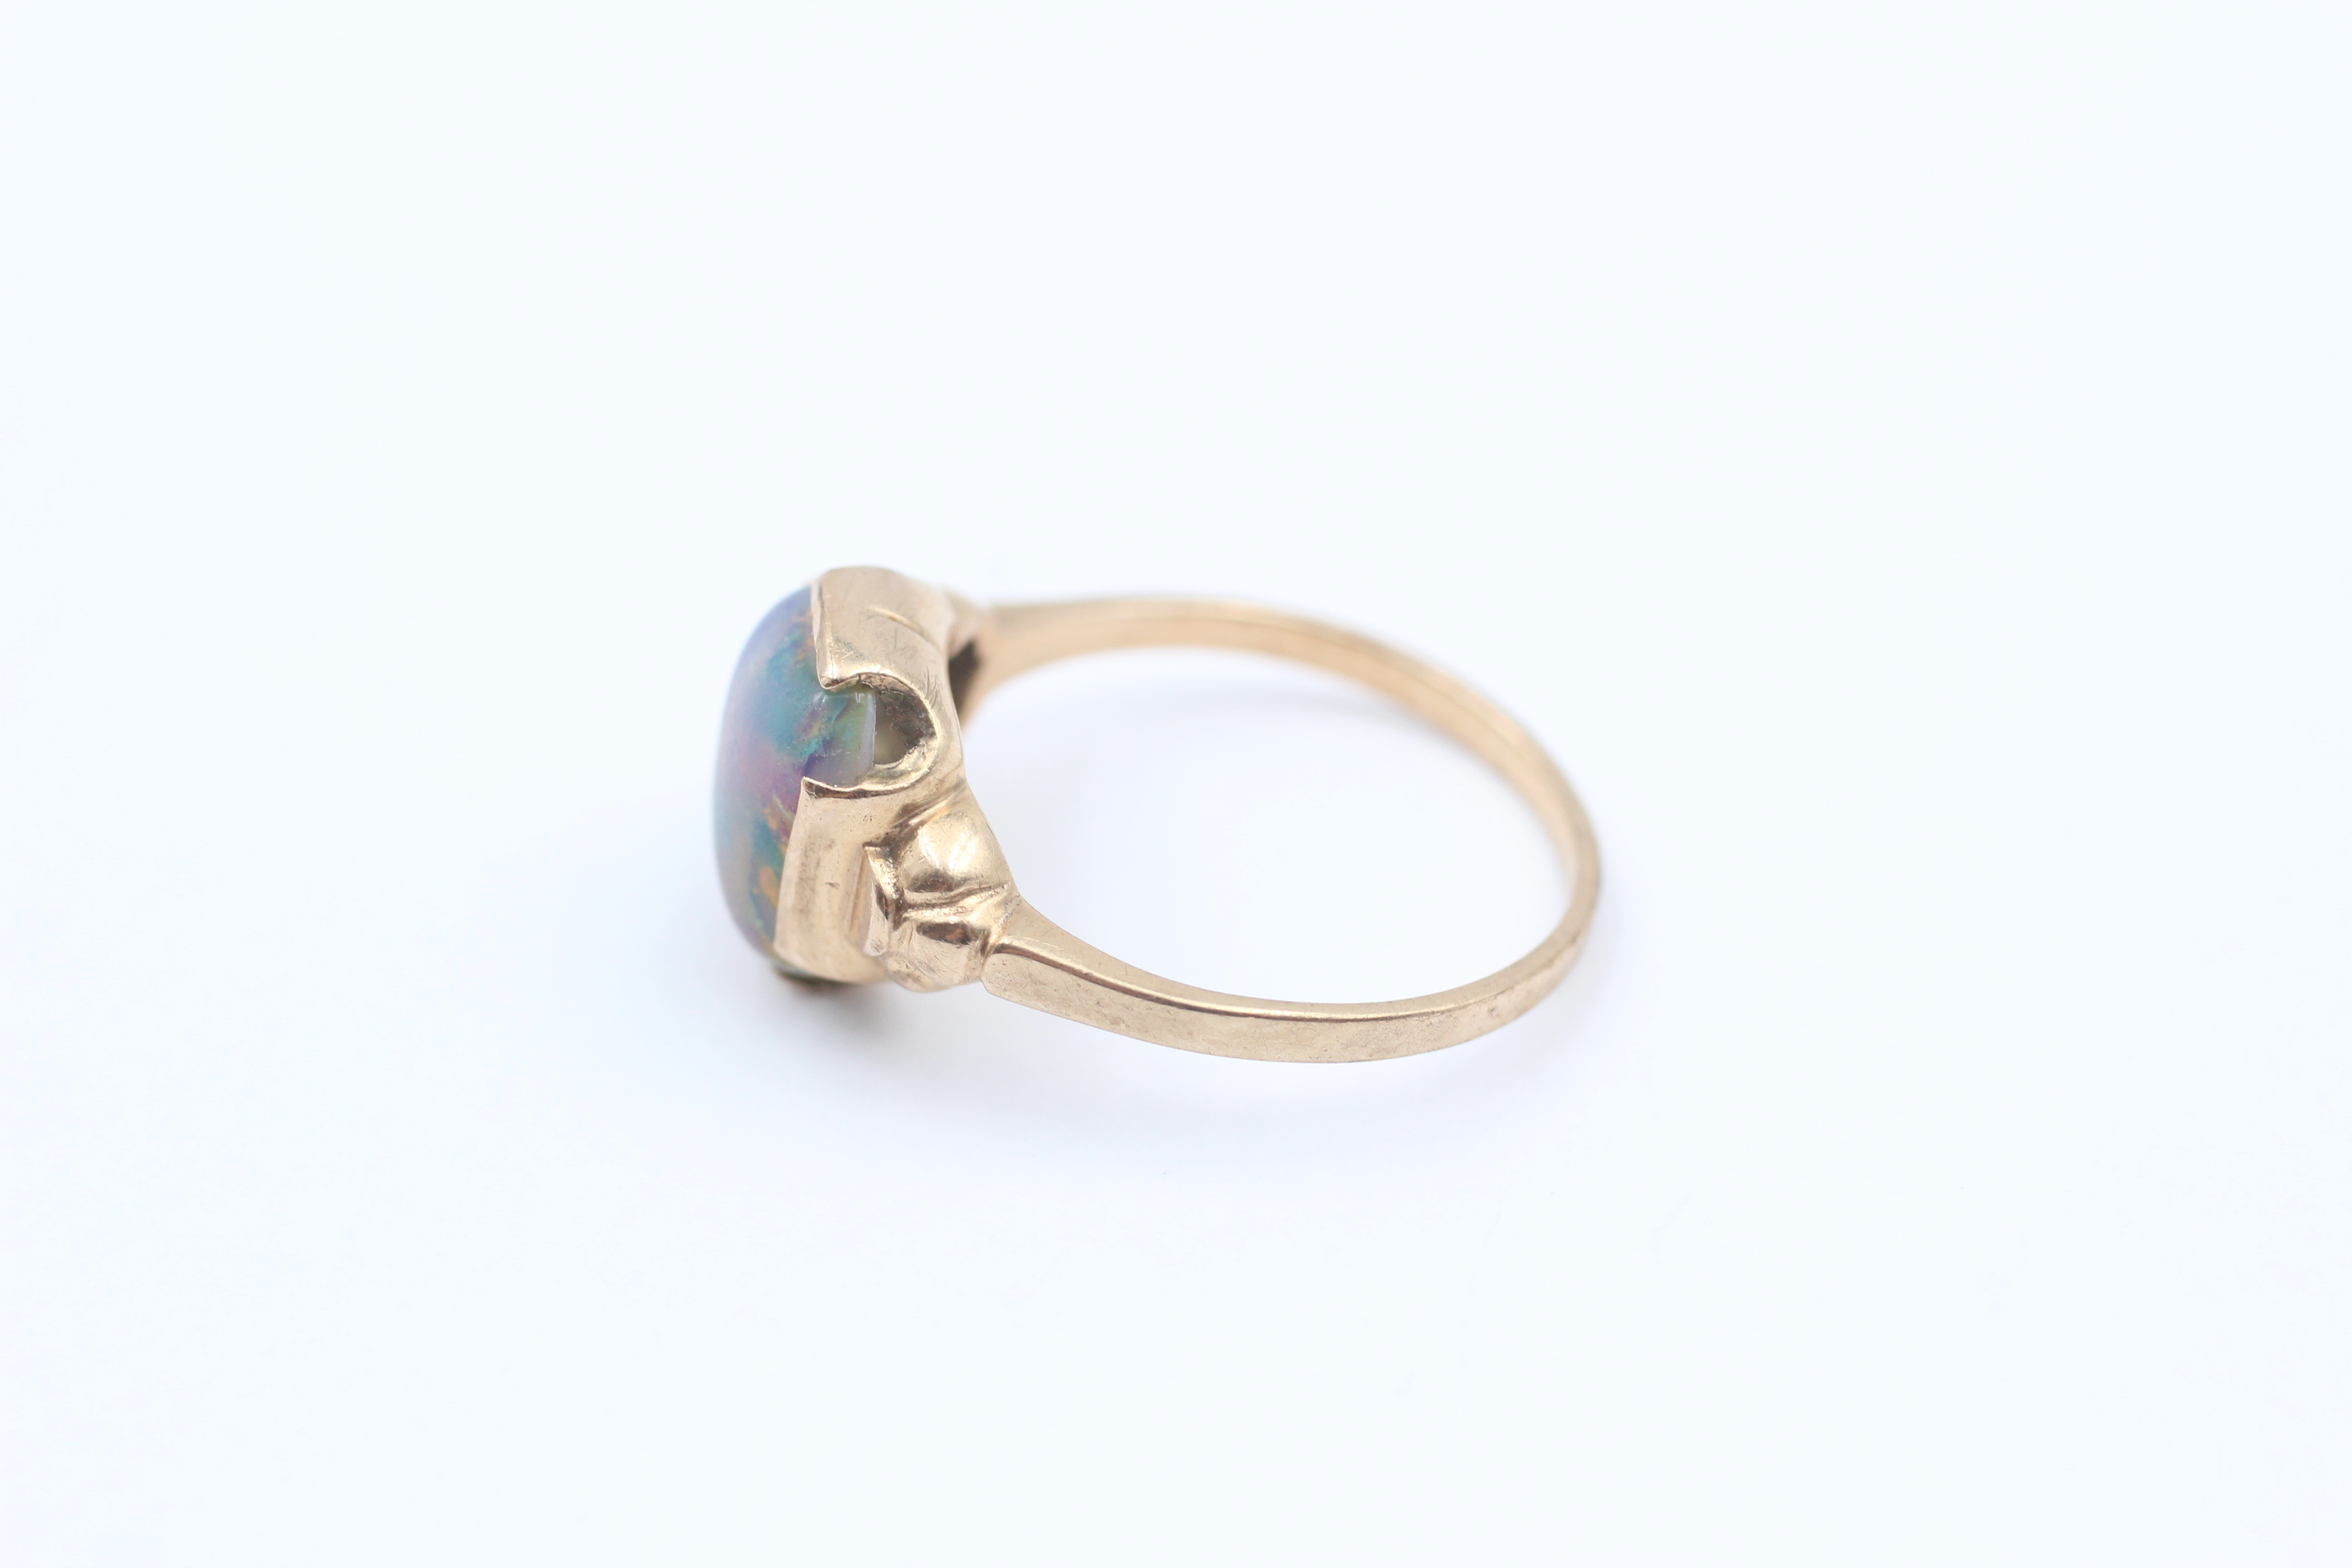 9ct Gold Vintage Opal Statement Ring - Image 2 of 4